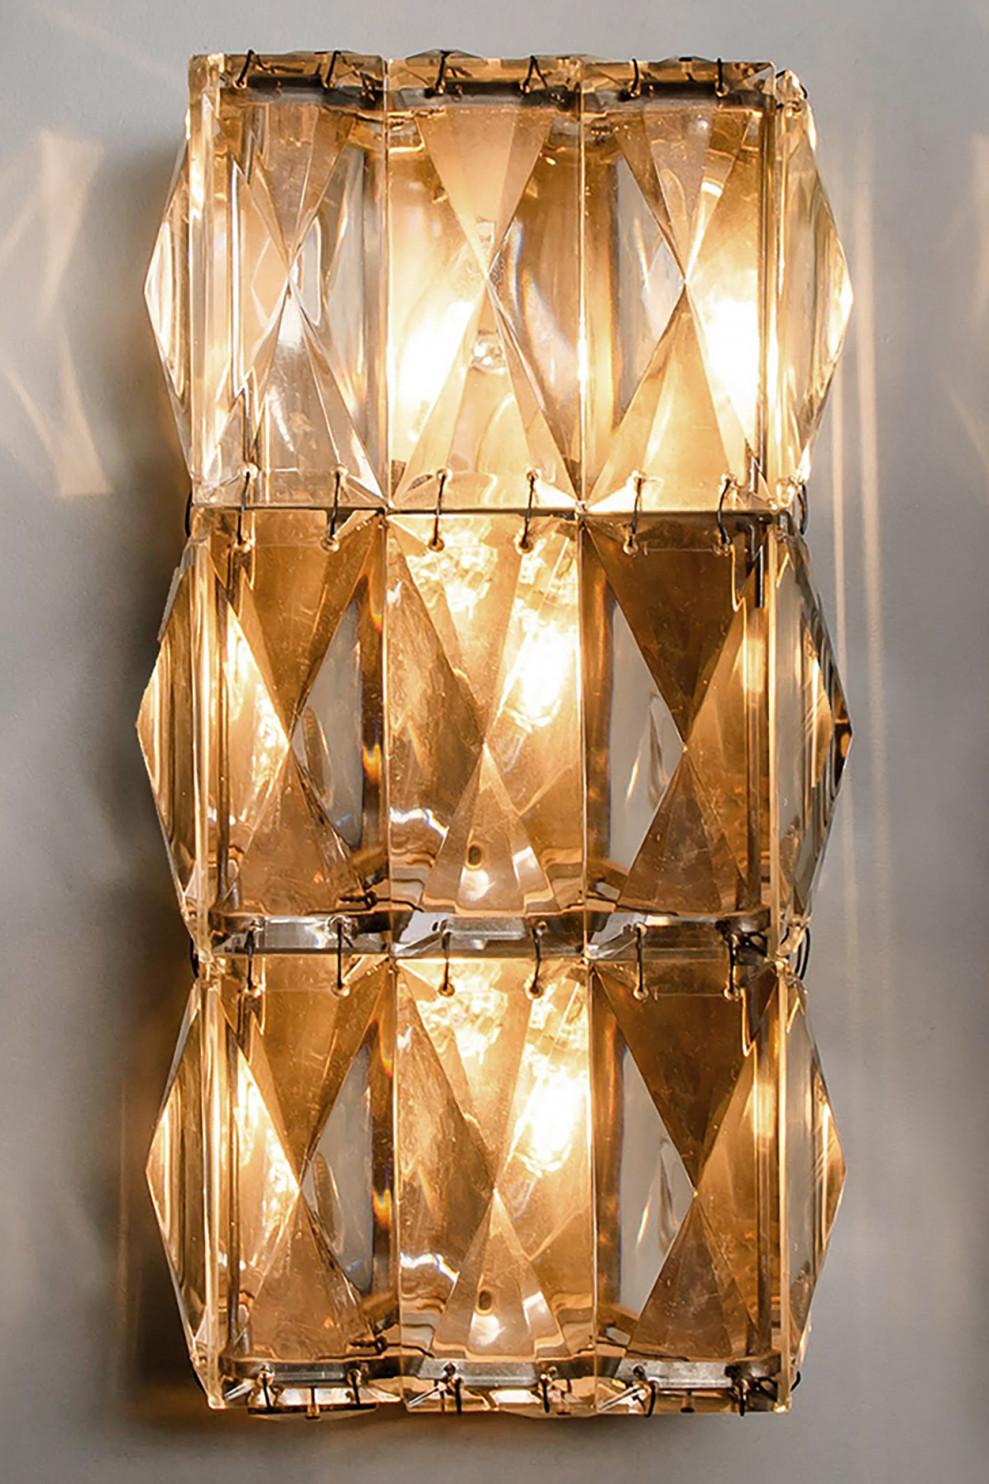 One of the six wall light fixtures by Bakalowits, Austria, heavy quality. The fixtures are comfortable with all decor periods and executed to a very high standard. The high quality rectangular crystals are reflecting the light beautifully.

Base